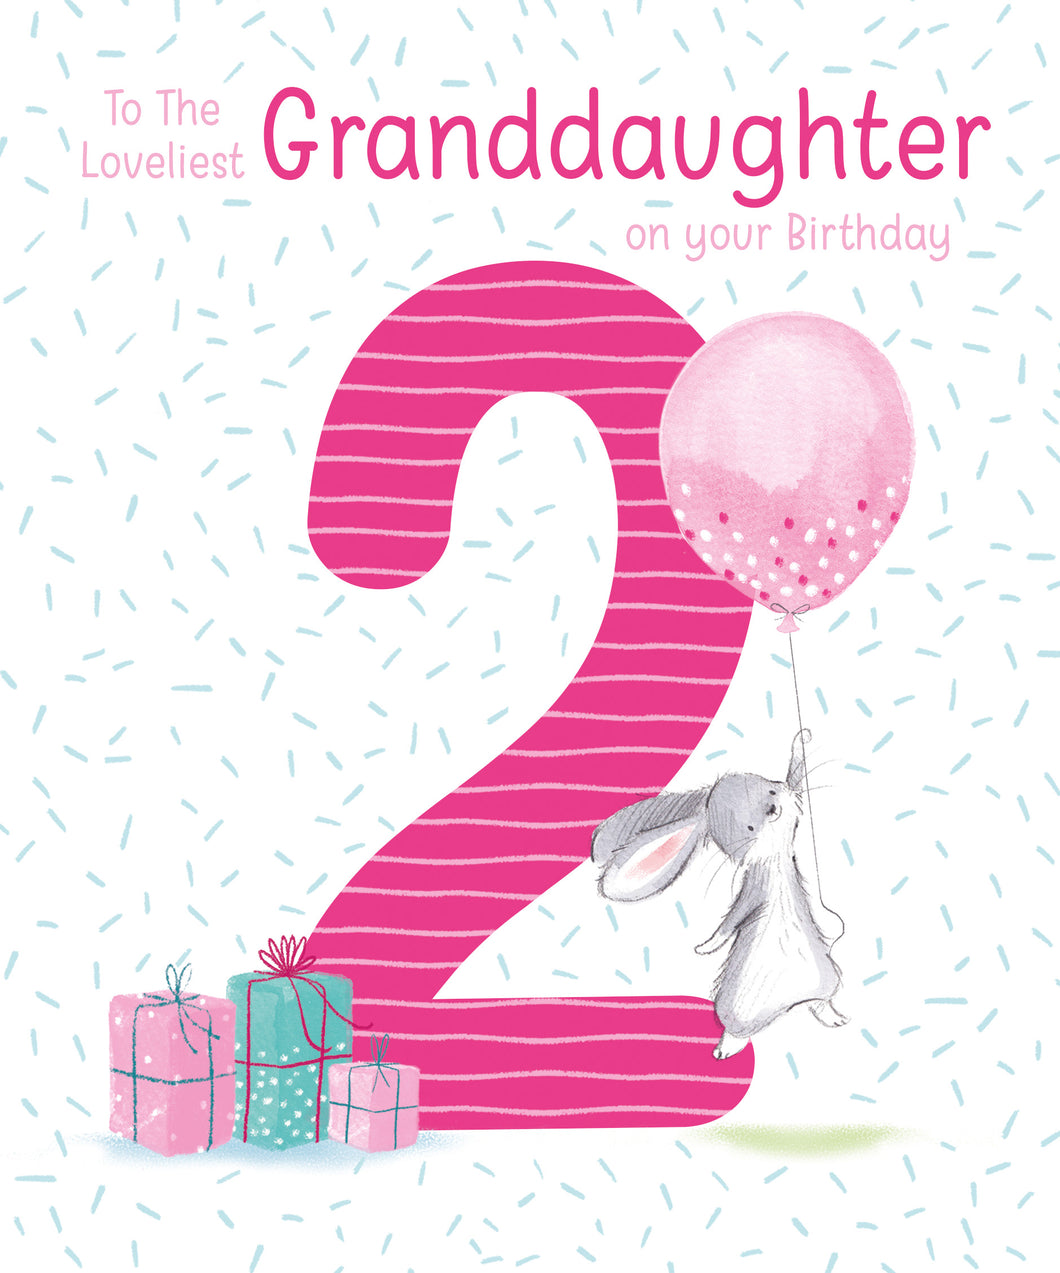 Granddaughter 2nd Birthday Card - Greeting Cards